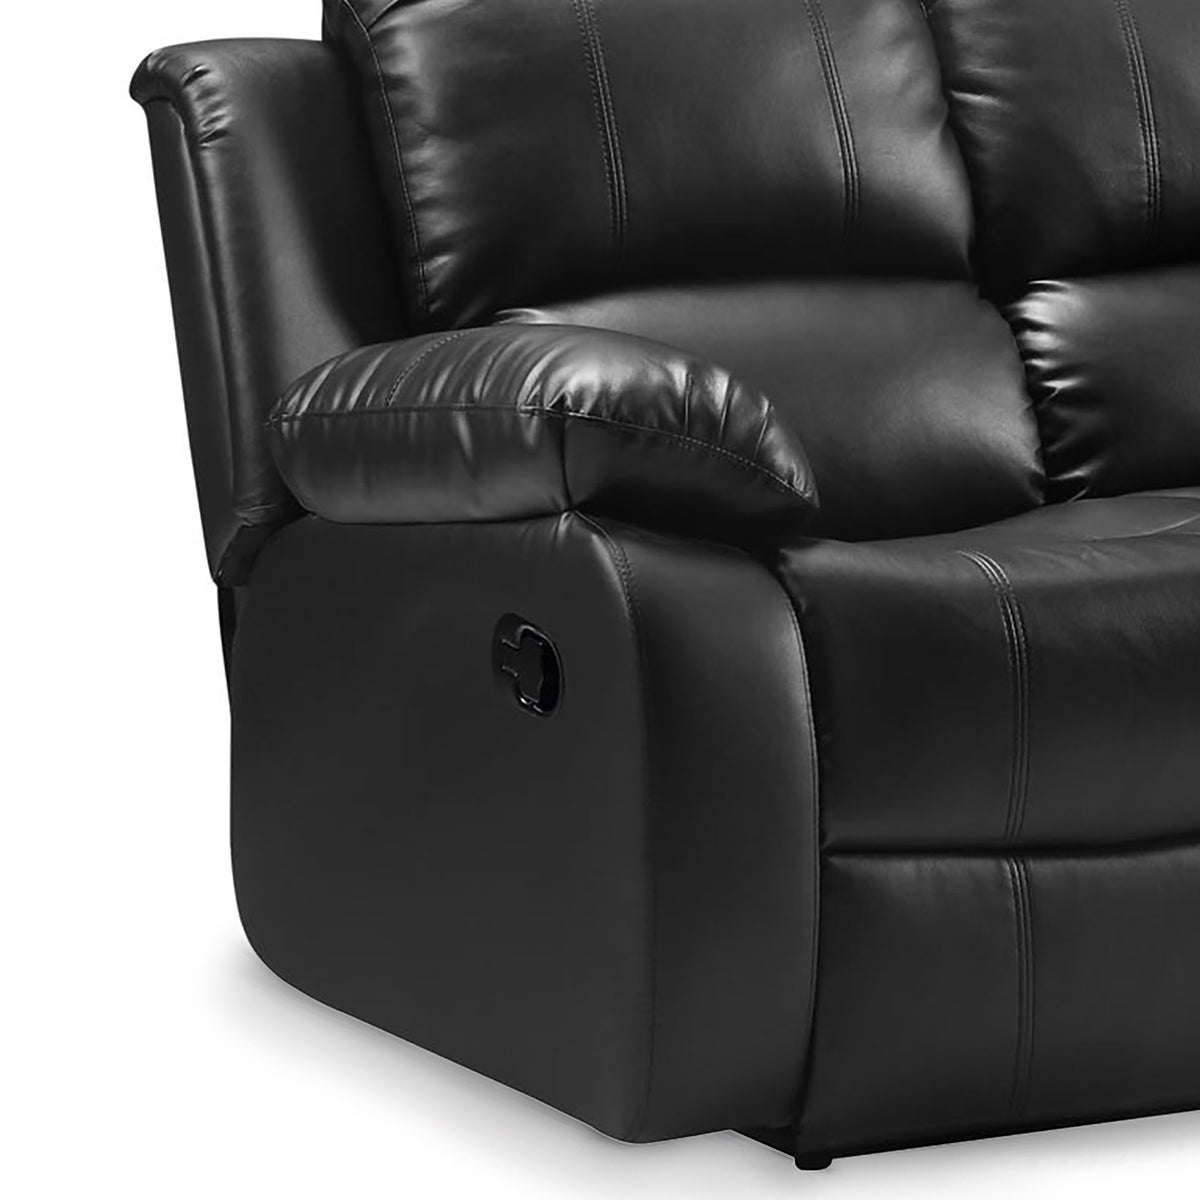 Valencia Black 2 Seater Reclining Air Leather Sofa - Close up of  side of sofa